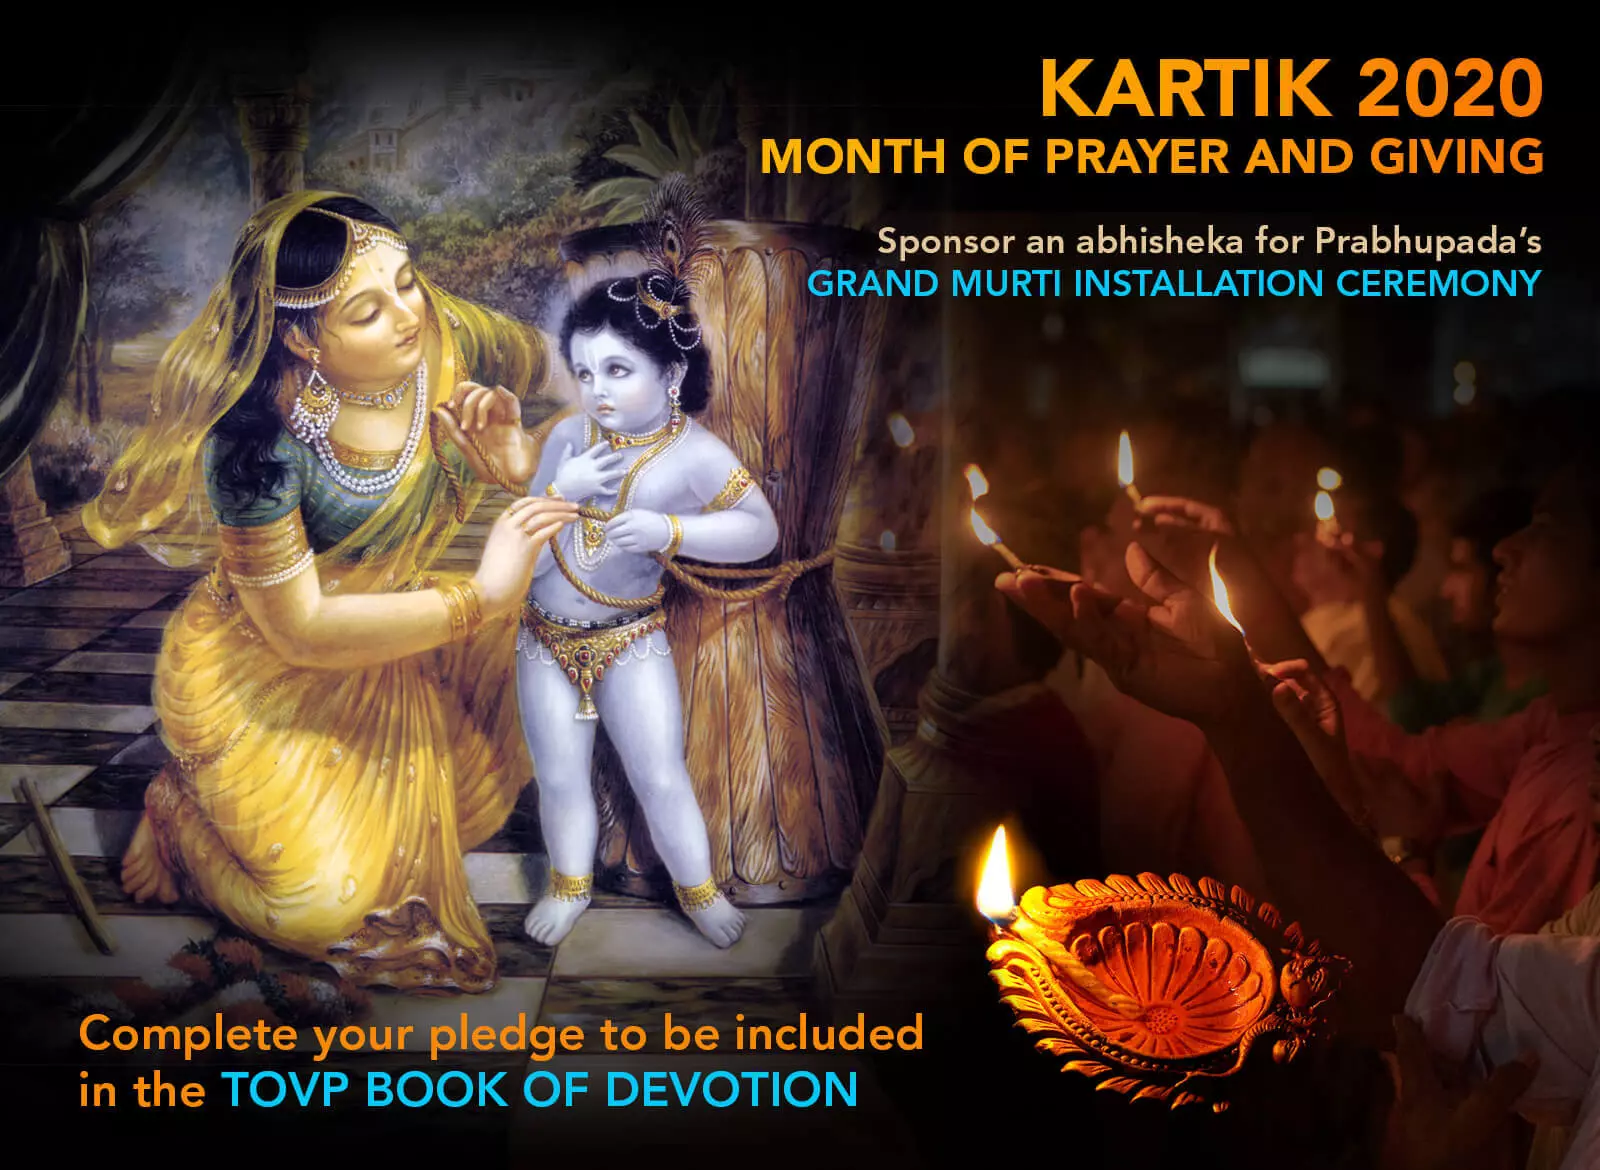 Happy Kartik From the TOVP Team